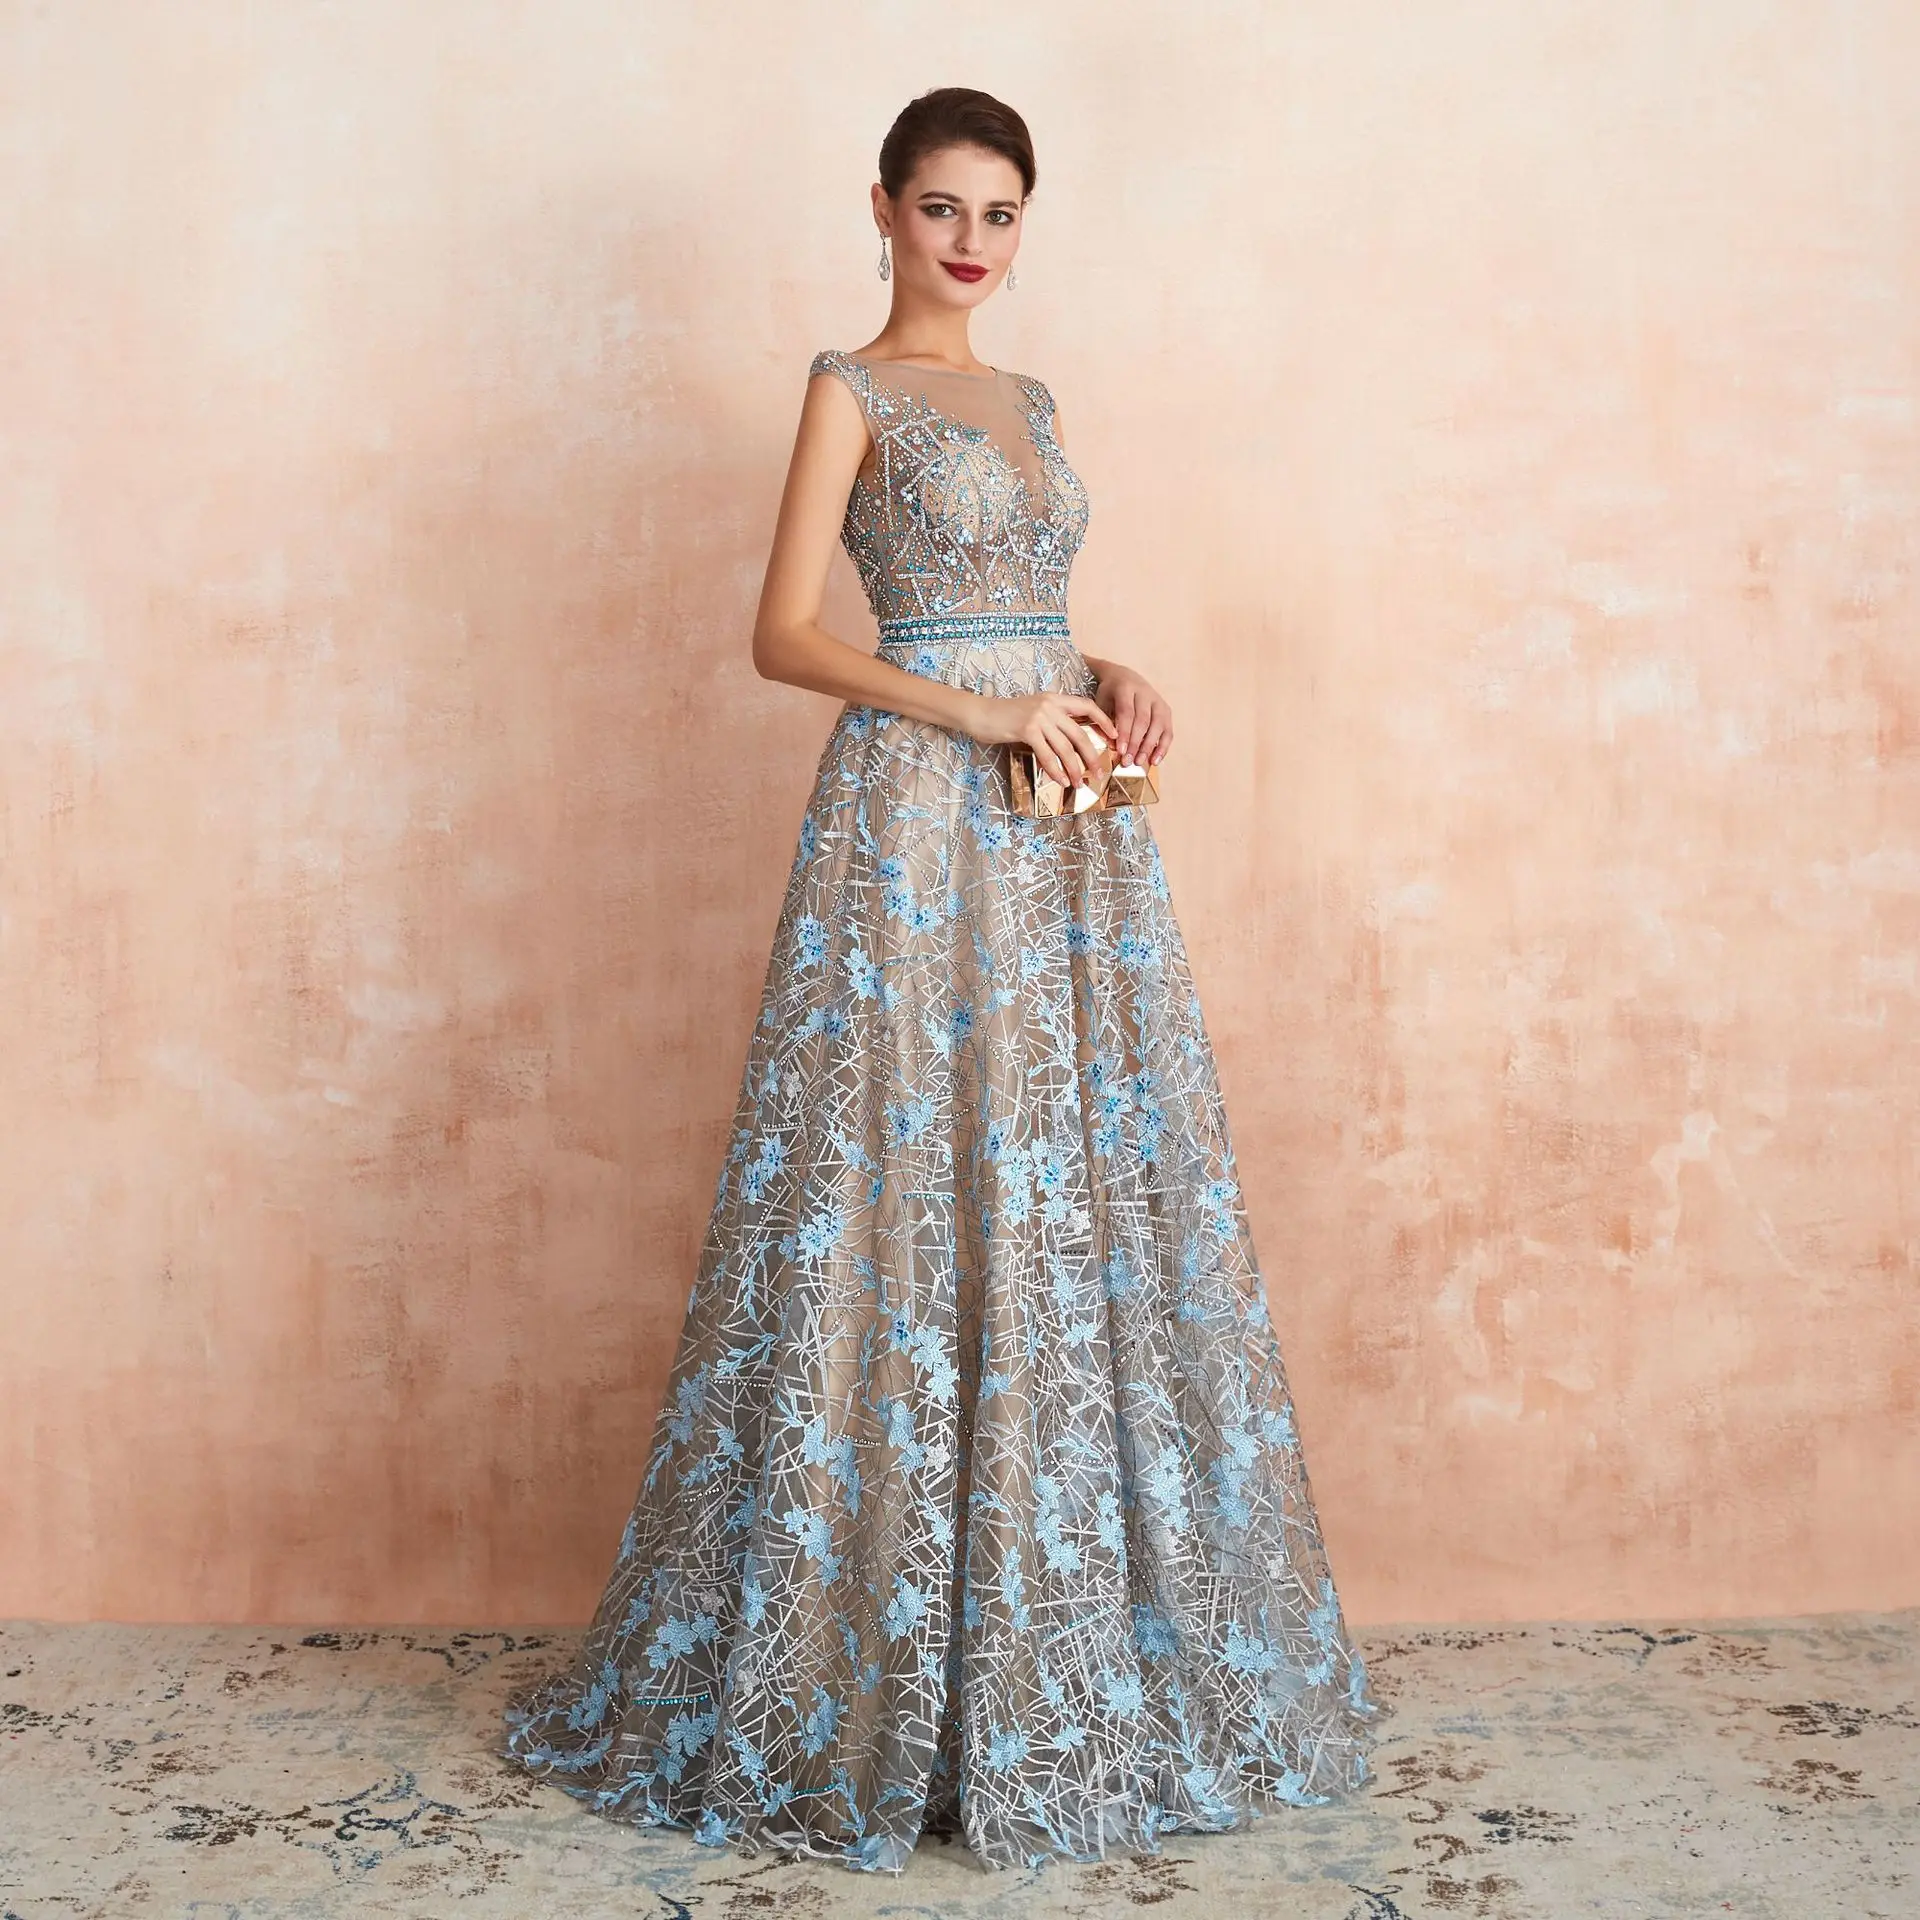 

2020 Blue Lace Prom Dresses Beaded Rhinestone A Line Cap Sleeves Long Sheer Neck Evening Gowns Engagement Dress Abendkleider